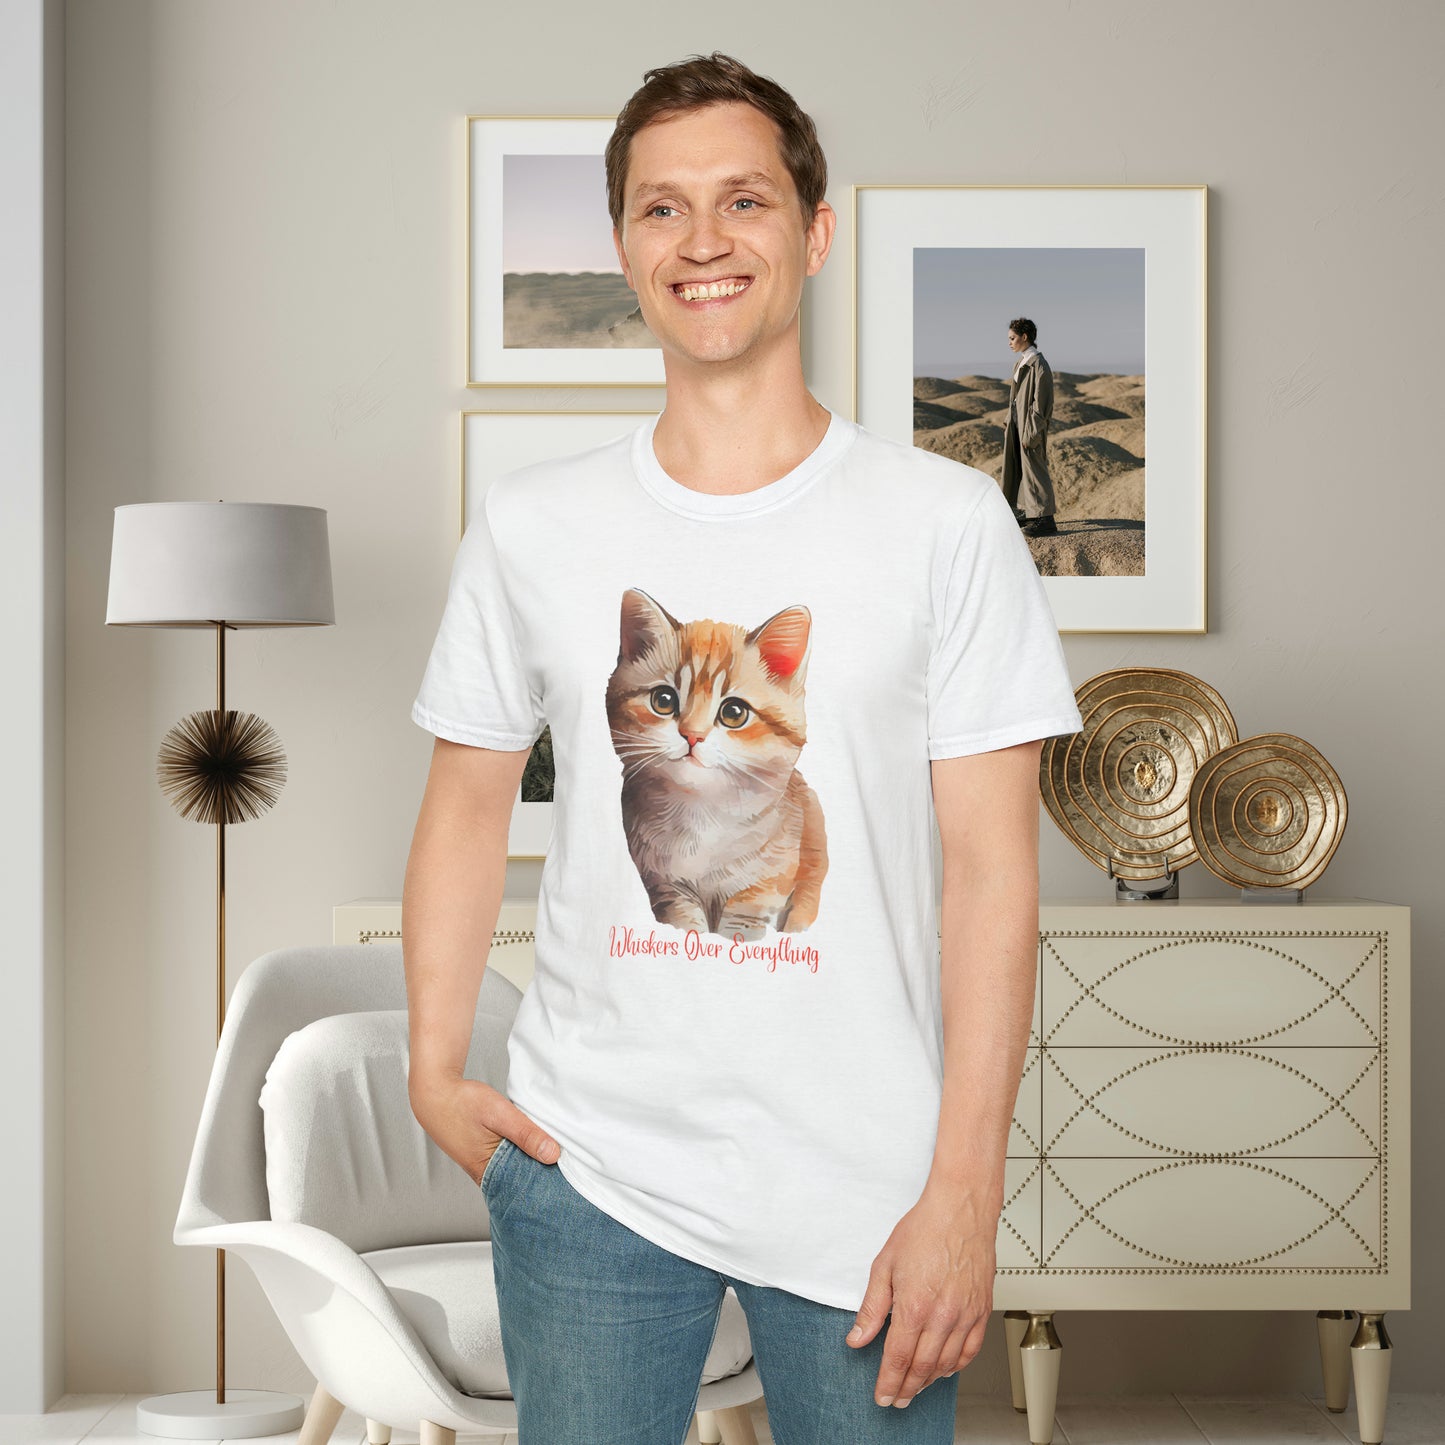 A cute cat with  “Whiskers over everything” below it on this Unisex Softstyle T-Shirt. Cat lovers get this.